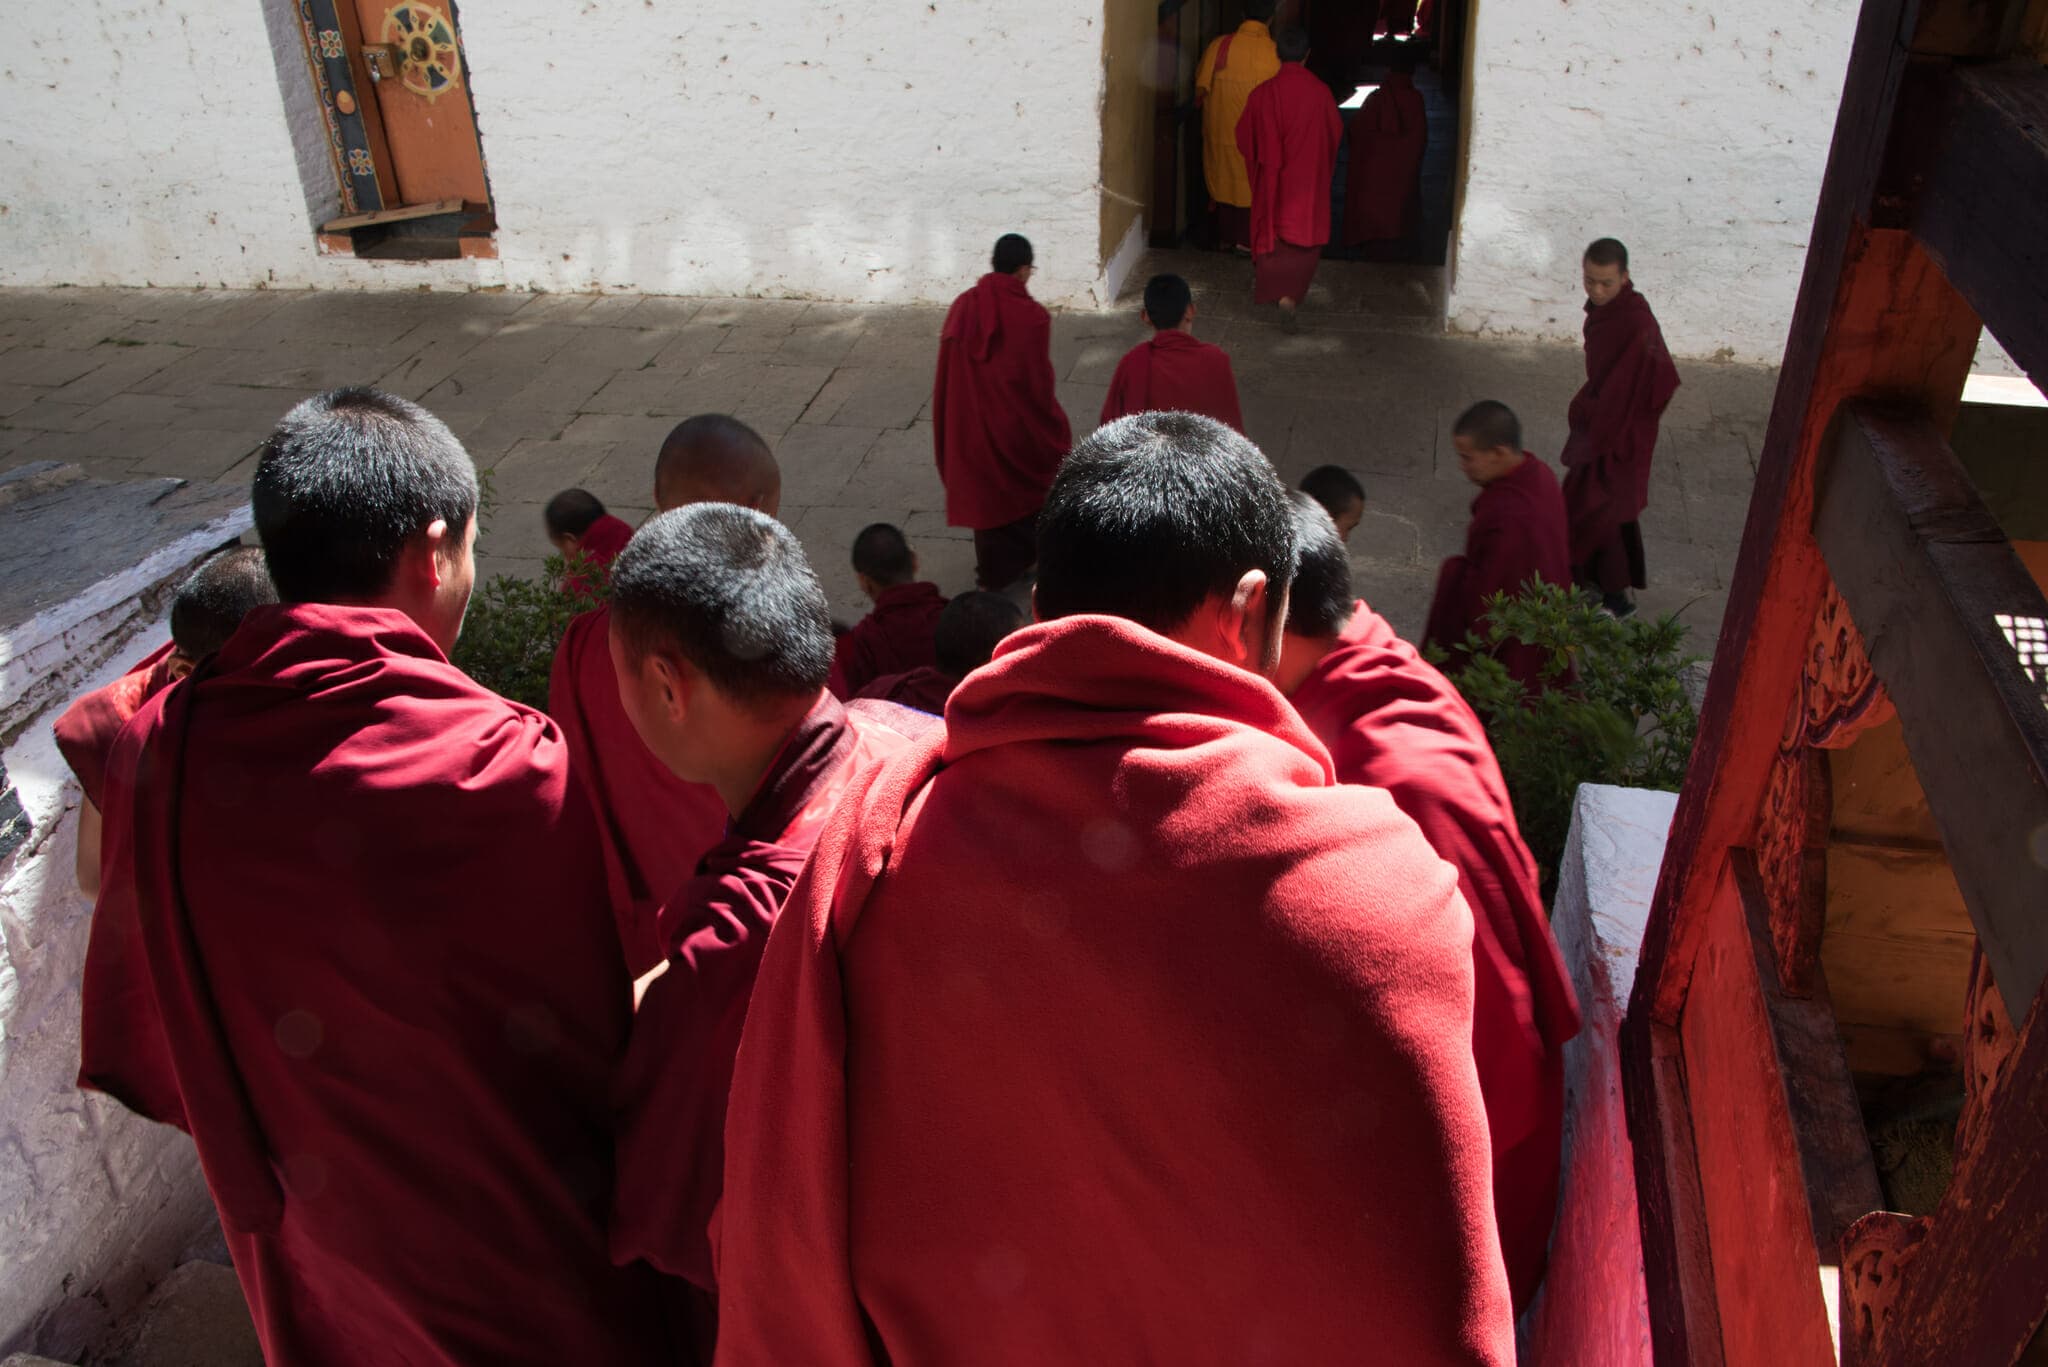 Bhutan Wrapped in a Blanket of Spirituality